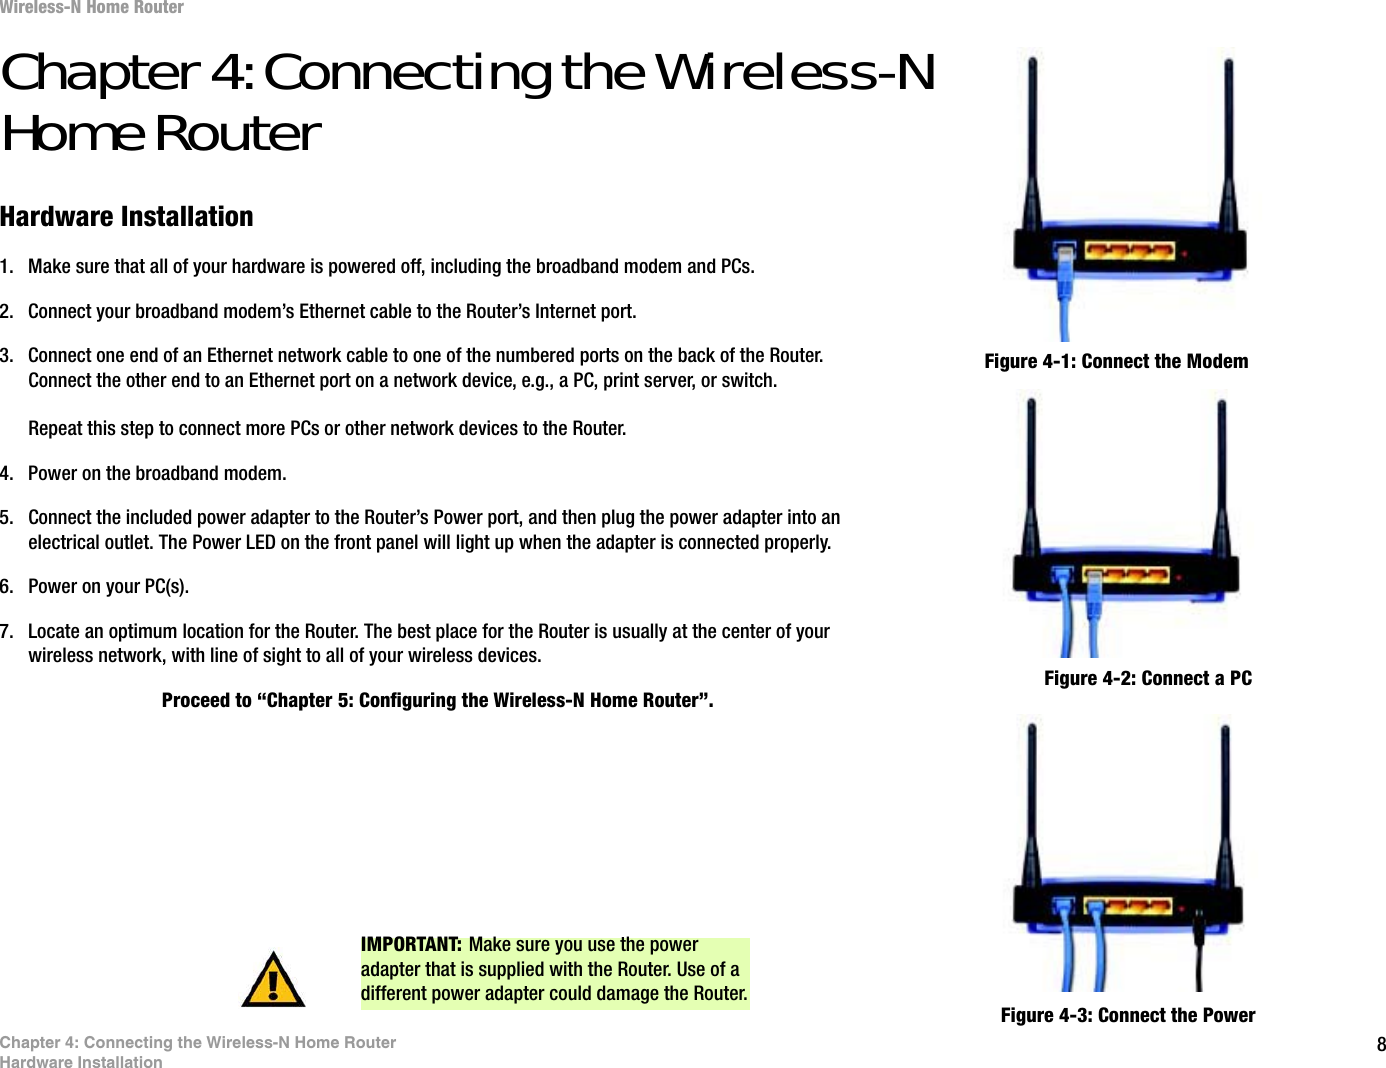 8Chapter 4: Connecting the Wireless-N Home RouterHardware InstallationWireless-N Home RouterChapter 4: Connecting the Wireless-N Home RouterHardware Installation1. Make sure that all of your hardware is powered off, including the broadband modem and PCs.2. Connect your broadband modem’s Ethernet cable to the Router’s Internet port.3. Connect one end of an Ethernet network cable to one of the numbered ports on the back of the Router. Connect the other end to an Ethernet port on a network device, e.g., a PC, print server, or switch.Repeat this step to connect more PCs or other network devices to the Router.4. Power on the broadband modem.5. Connect the included power adapter to the Router’s Power port, and then plug the power adapter into an electrical outlet. The Power LED on the front panel will light up when the adapter is connected properly.6. Power on your PC(s).7. Locate an optimum location for the Router. The best place for the Router is usually at the center of your wireless network, with line of sight to all of your wireless devices.Proceed to “Chapter 5: Configuring the Wireless-N Home Router”.Figure 4-1: Connect the ModemFigure 4-2: Connect a PCFigure 4-3: Connect the PowerIMPORTANT: Make sure you use the power adapter that is supplied with the Router. Use of a different power adapter could damage the Router.